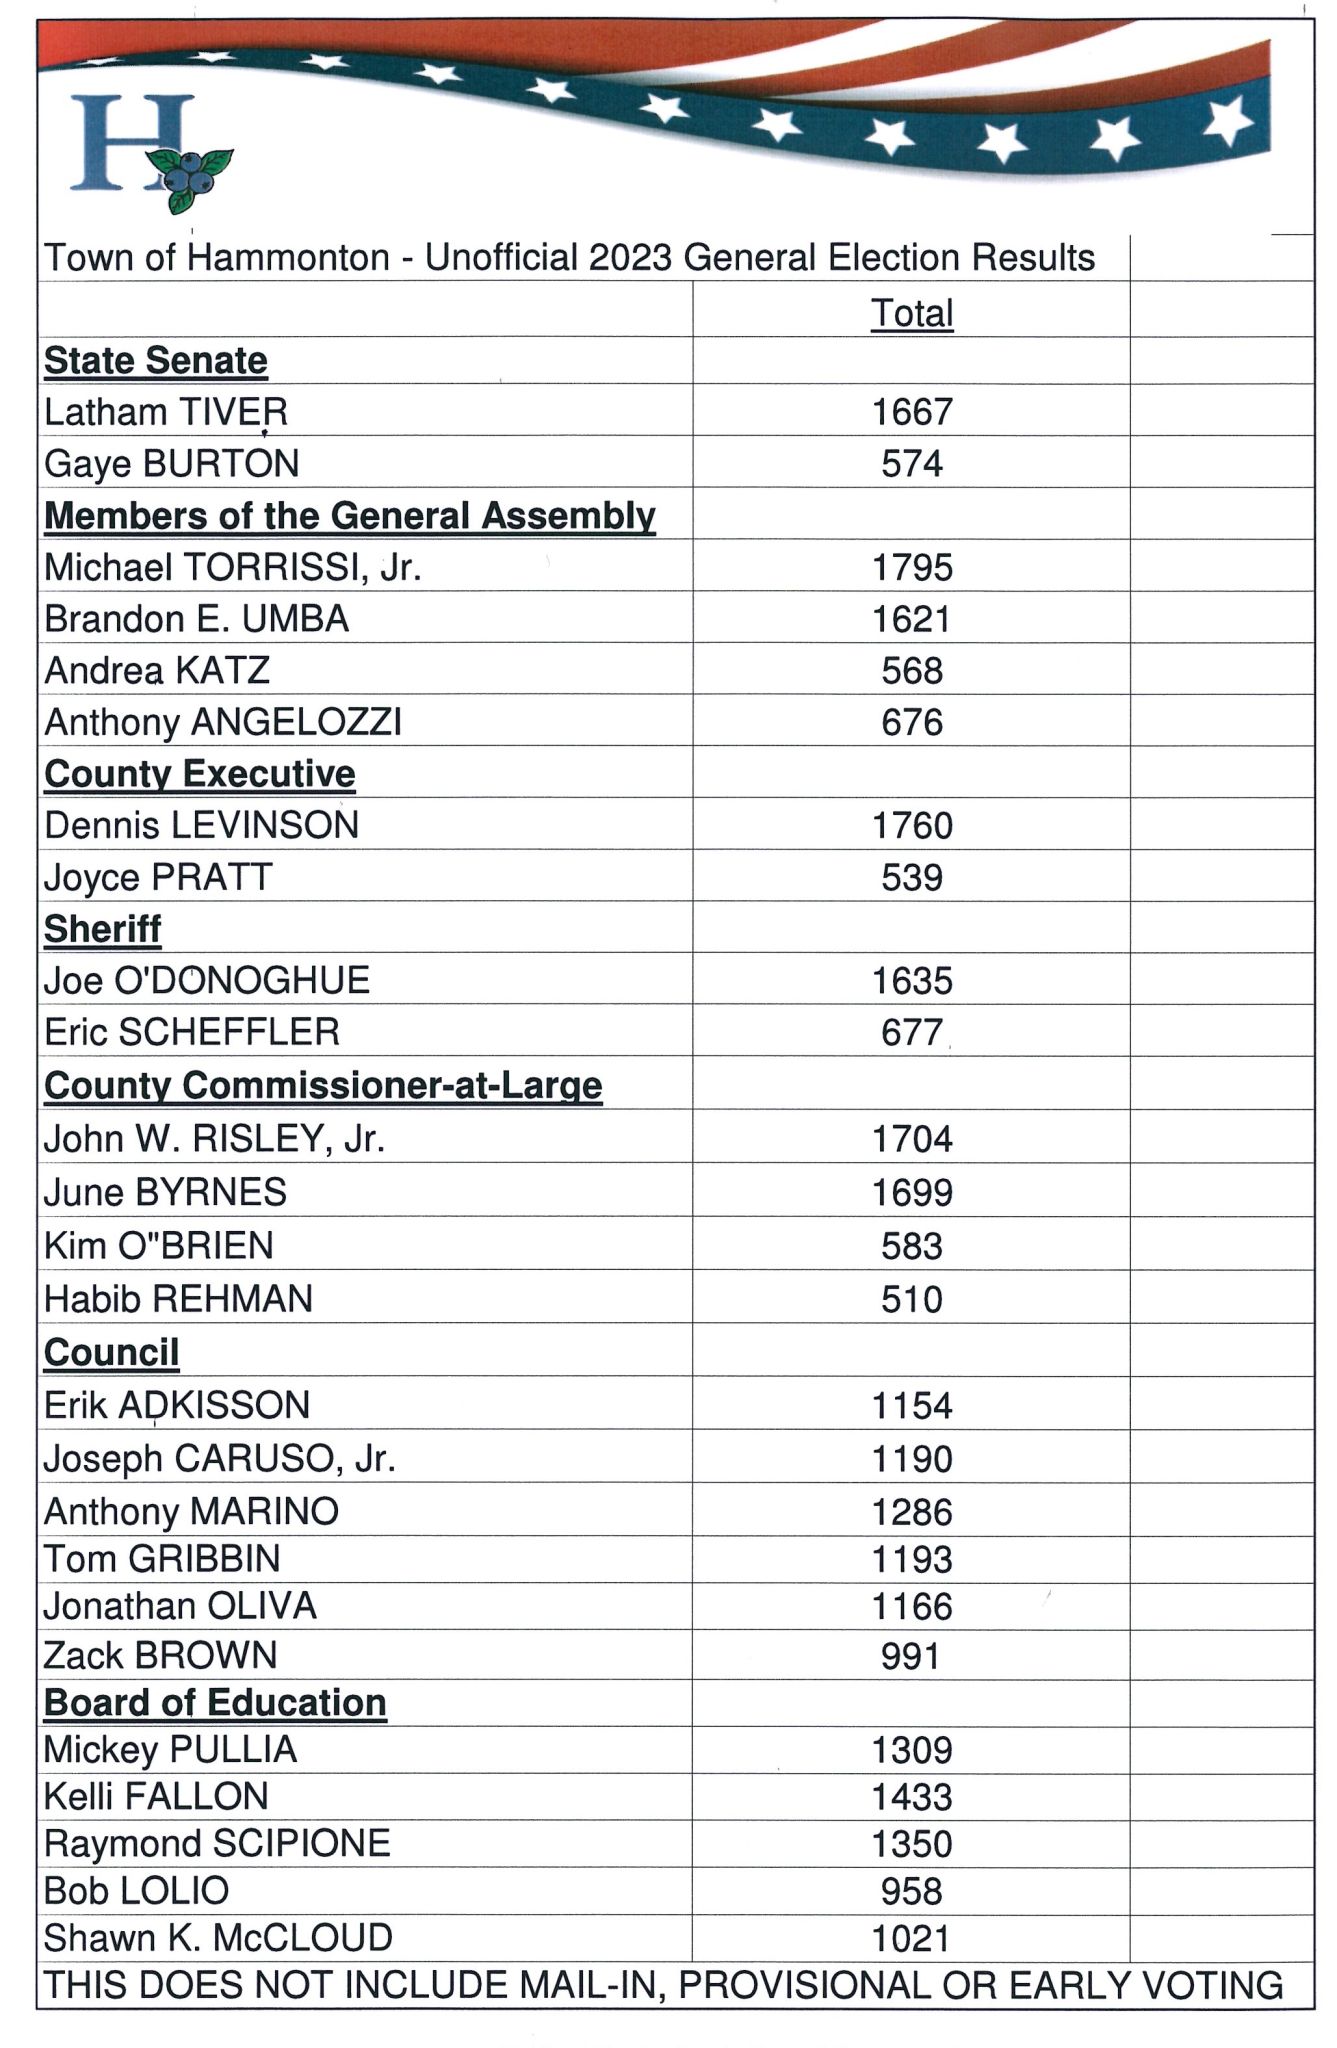 Town of HammontonUnofficial General Election Results 2023 Town of